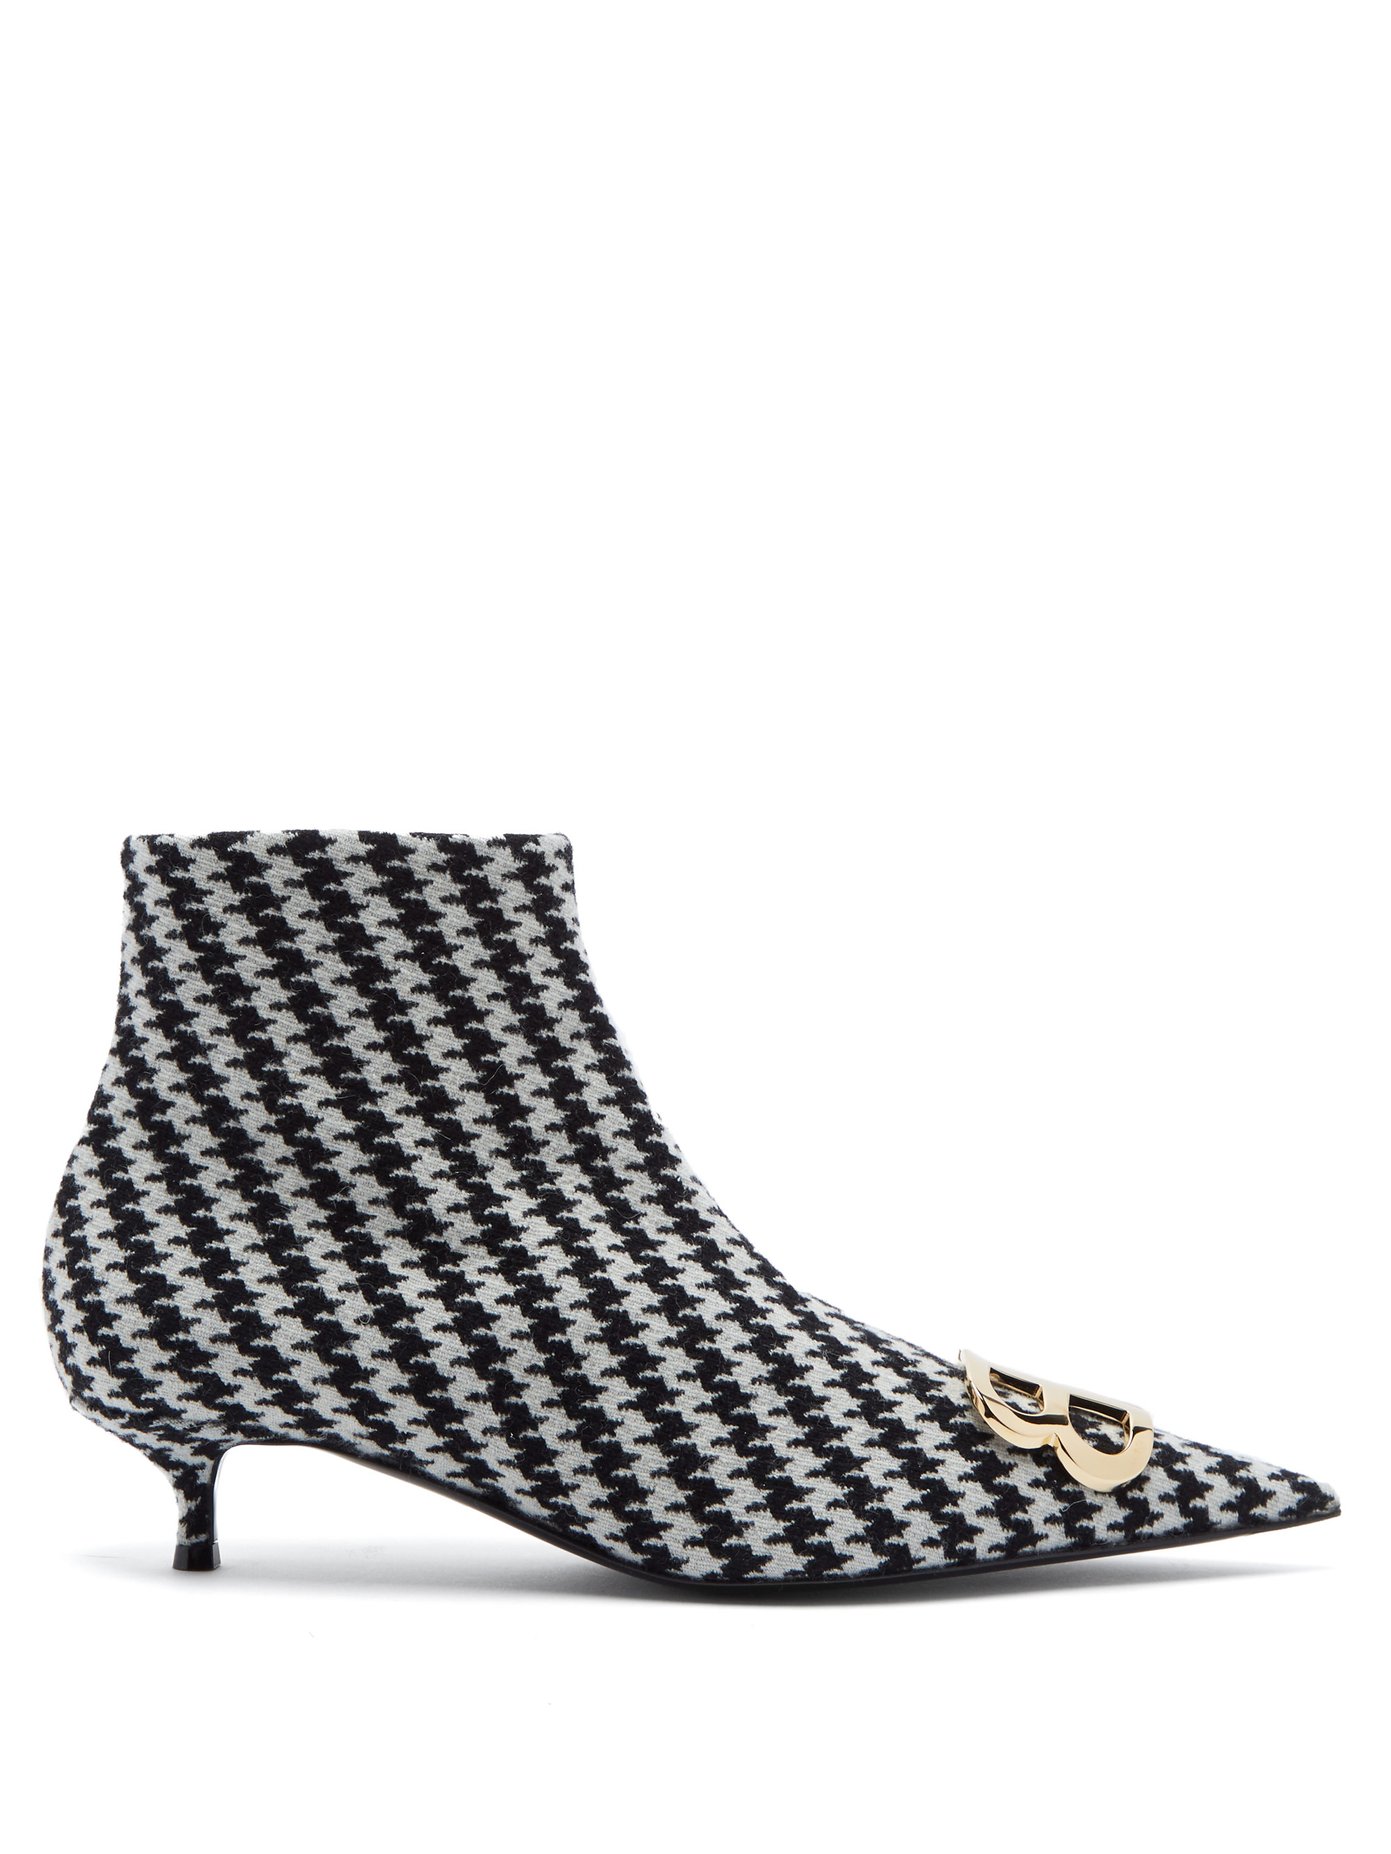 Houndstooth BB ankle boots | Balenciaga 